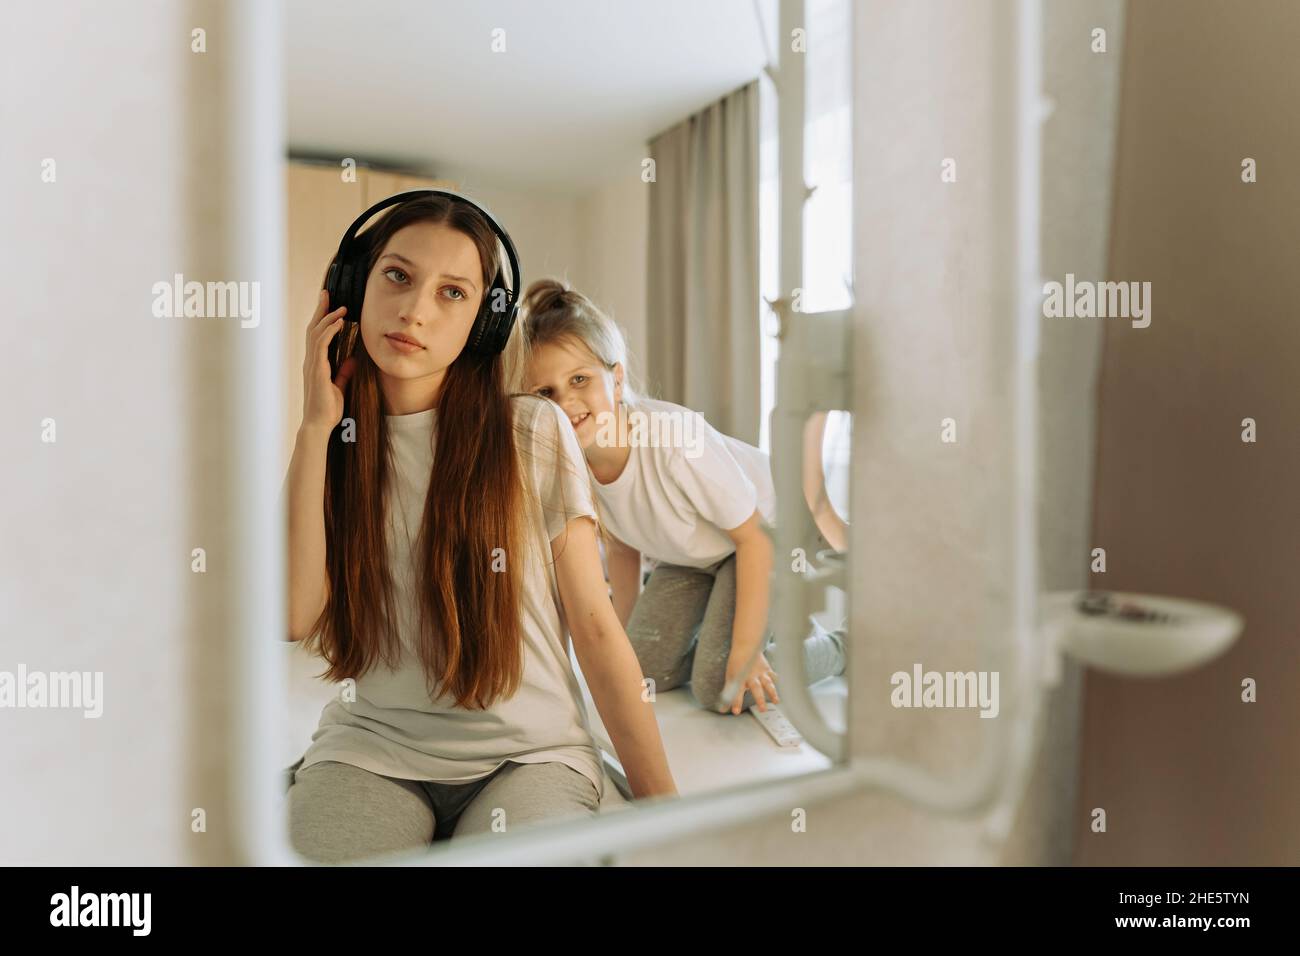 Teenage girl in headphones at mirror, little sister interferes, grimaces. Stock Photo